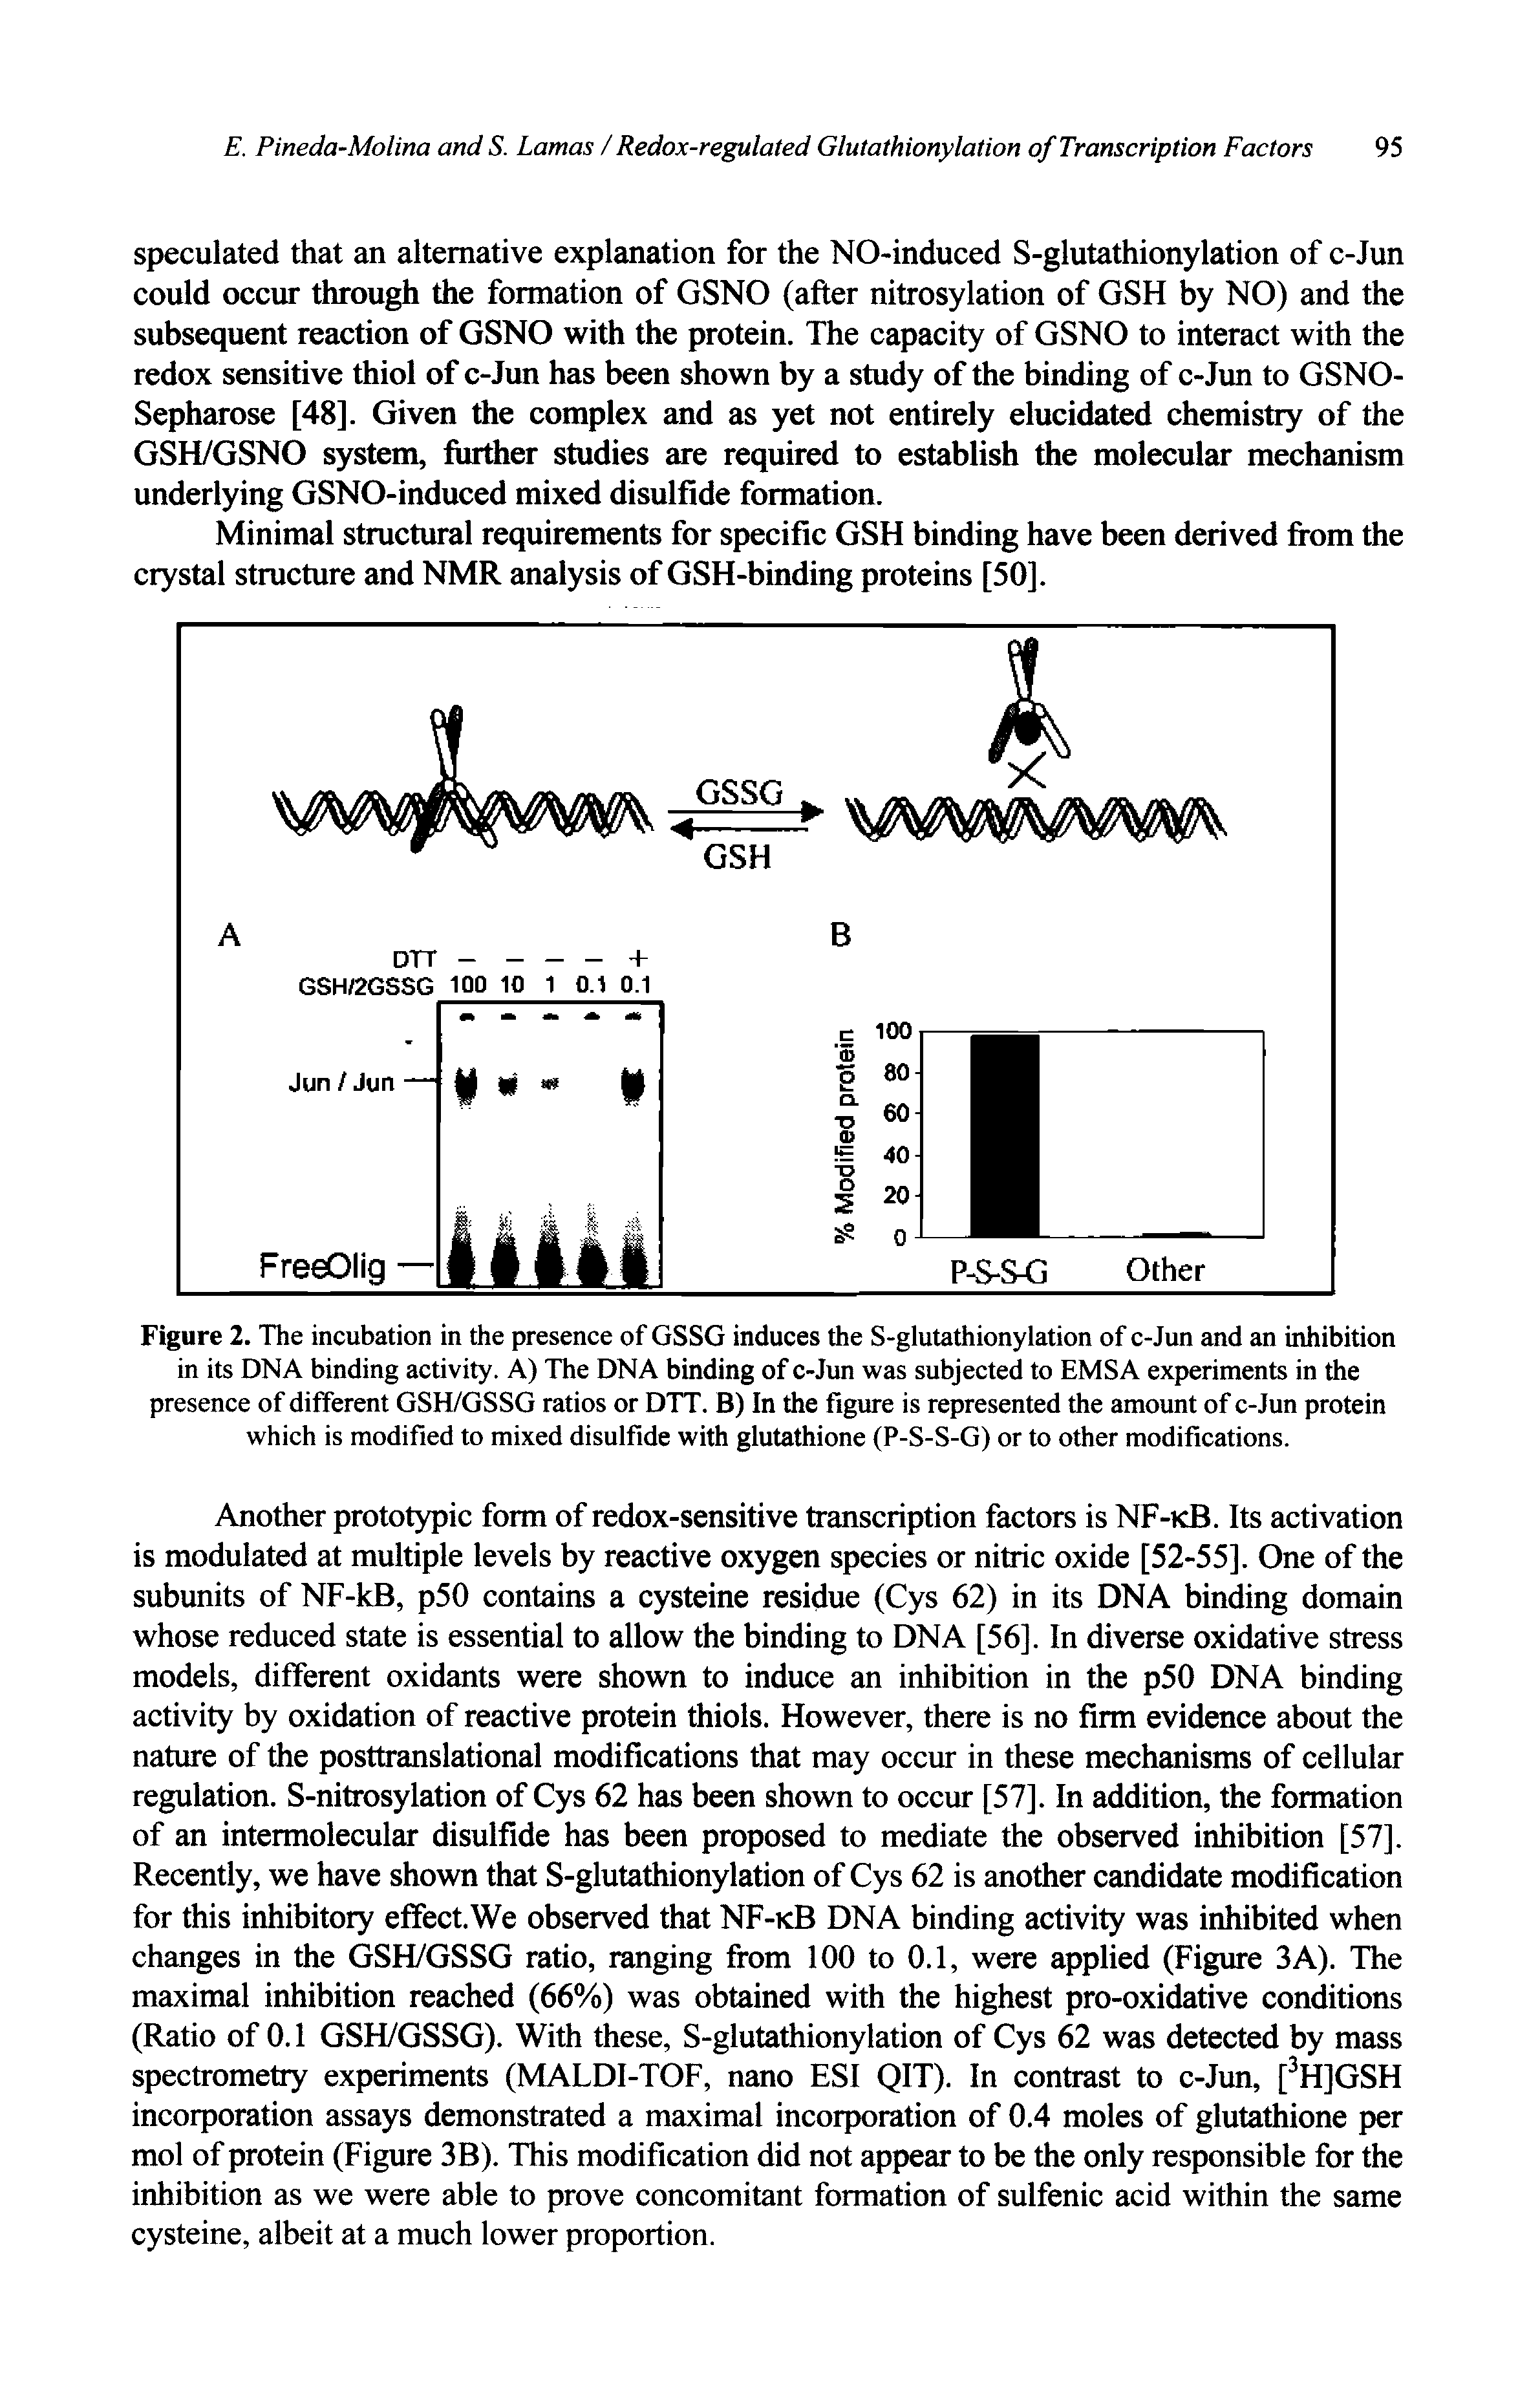 Figure 2. The incubation in the presence of GSSG induces the S-glutathionylation of c-Jun and an inhibition in its DNA binding activity. A) The DNA binding of c-Jun was subjected to EMSA experiments in the presence of different GSH/GSSG ratios or DTT. B) In the figure is represented the amount of c-Jun protein which is modified to mixed disulfide with glutathione (P-S-S-G) or to other modifications.